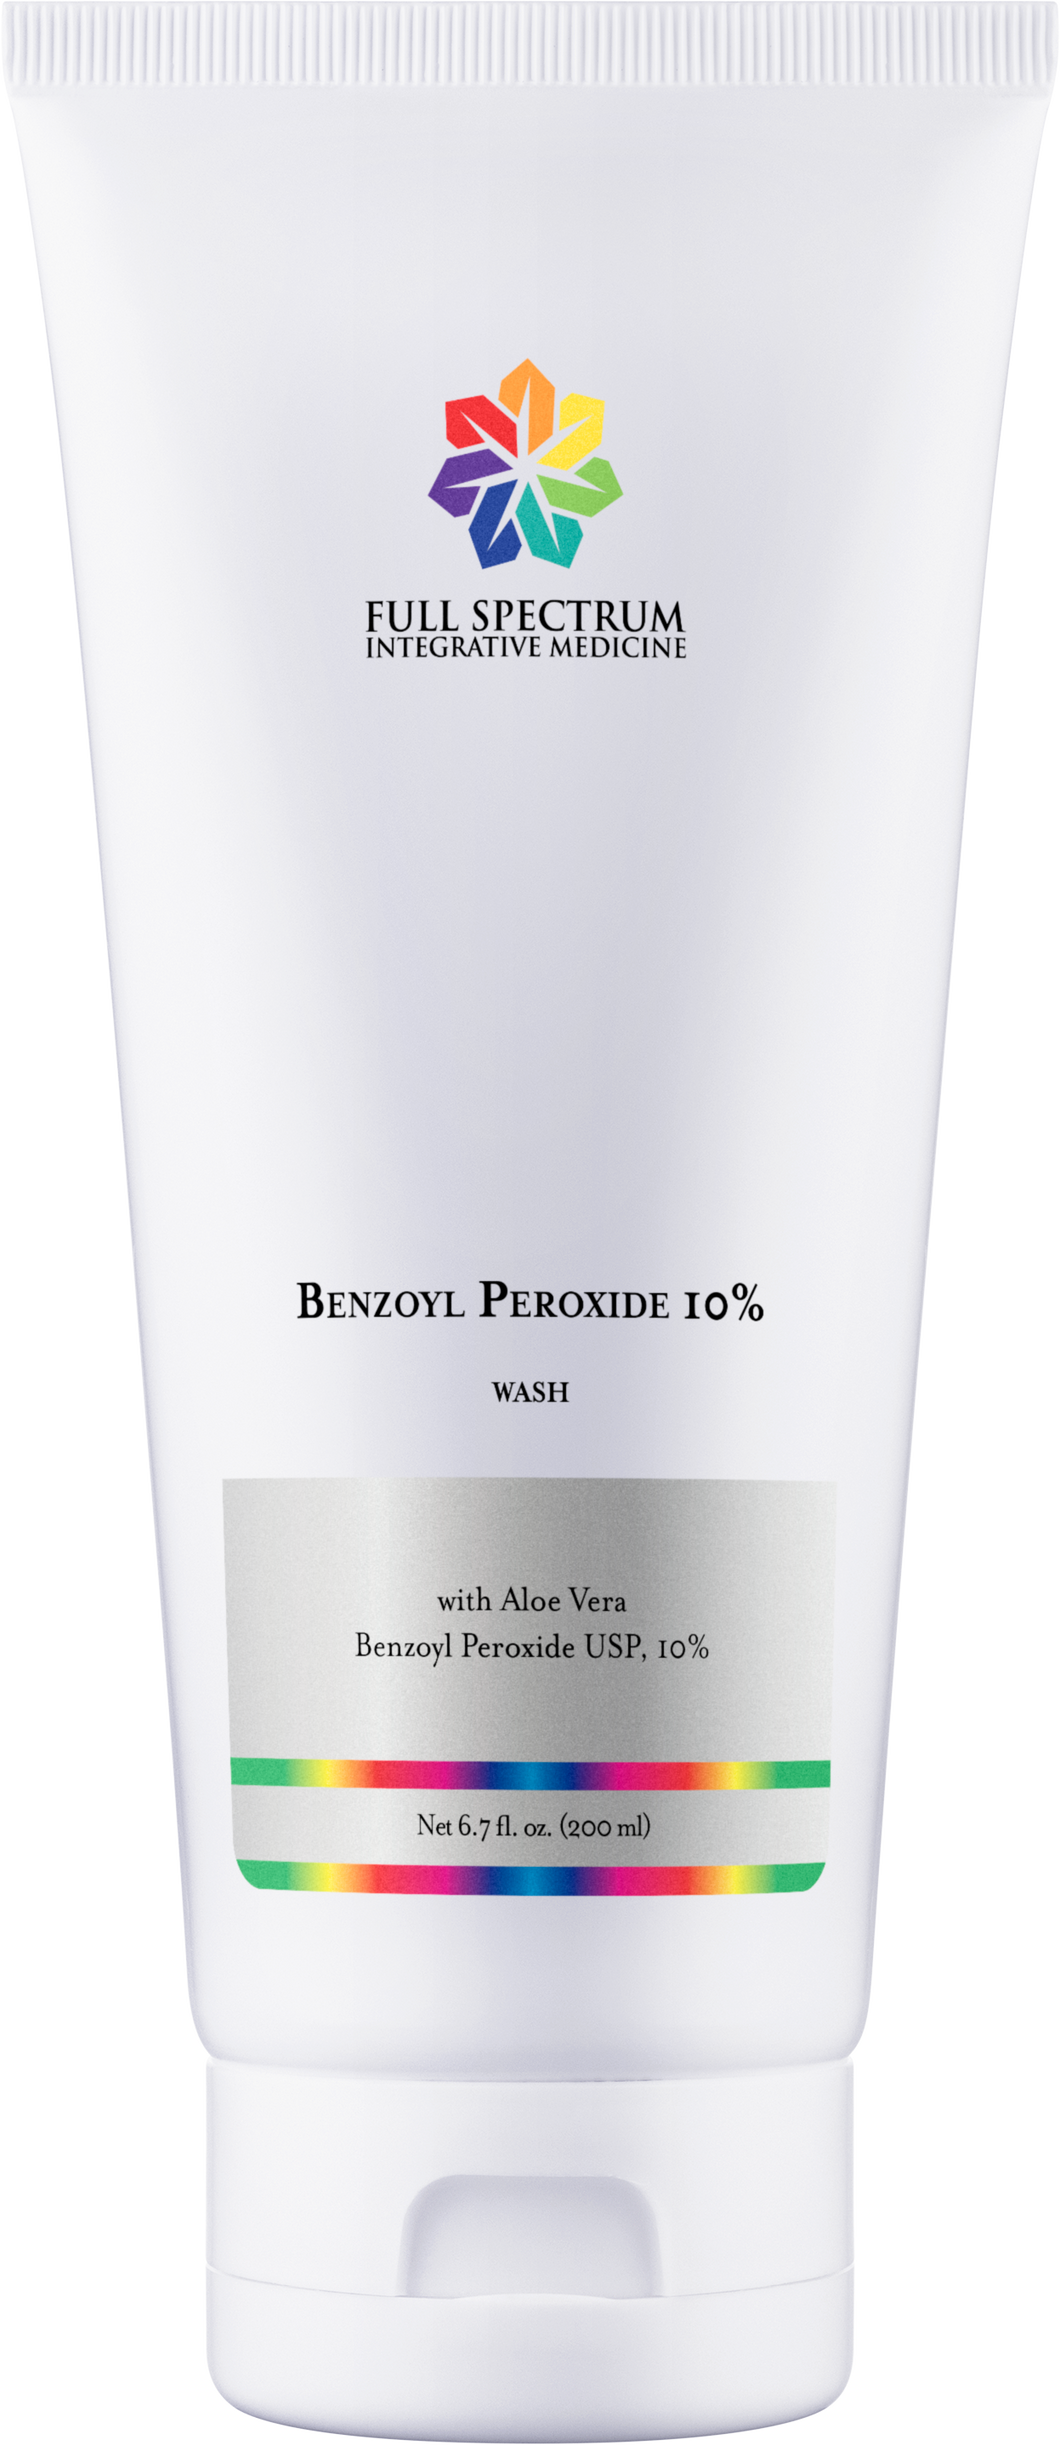 This facial wash thoroughly cleanses acne-prone skin with a special soap-free cleanser and is fortified with benzoyl peroxide for antibacterial protection.